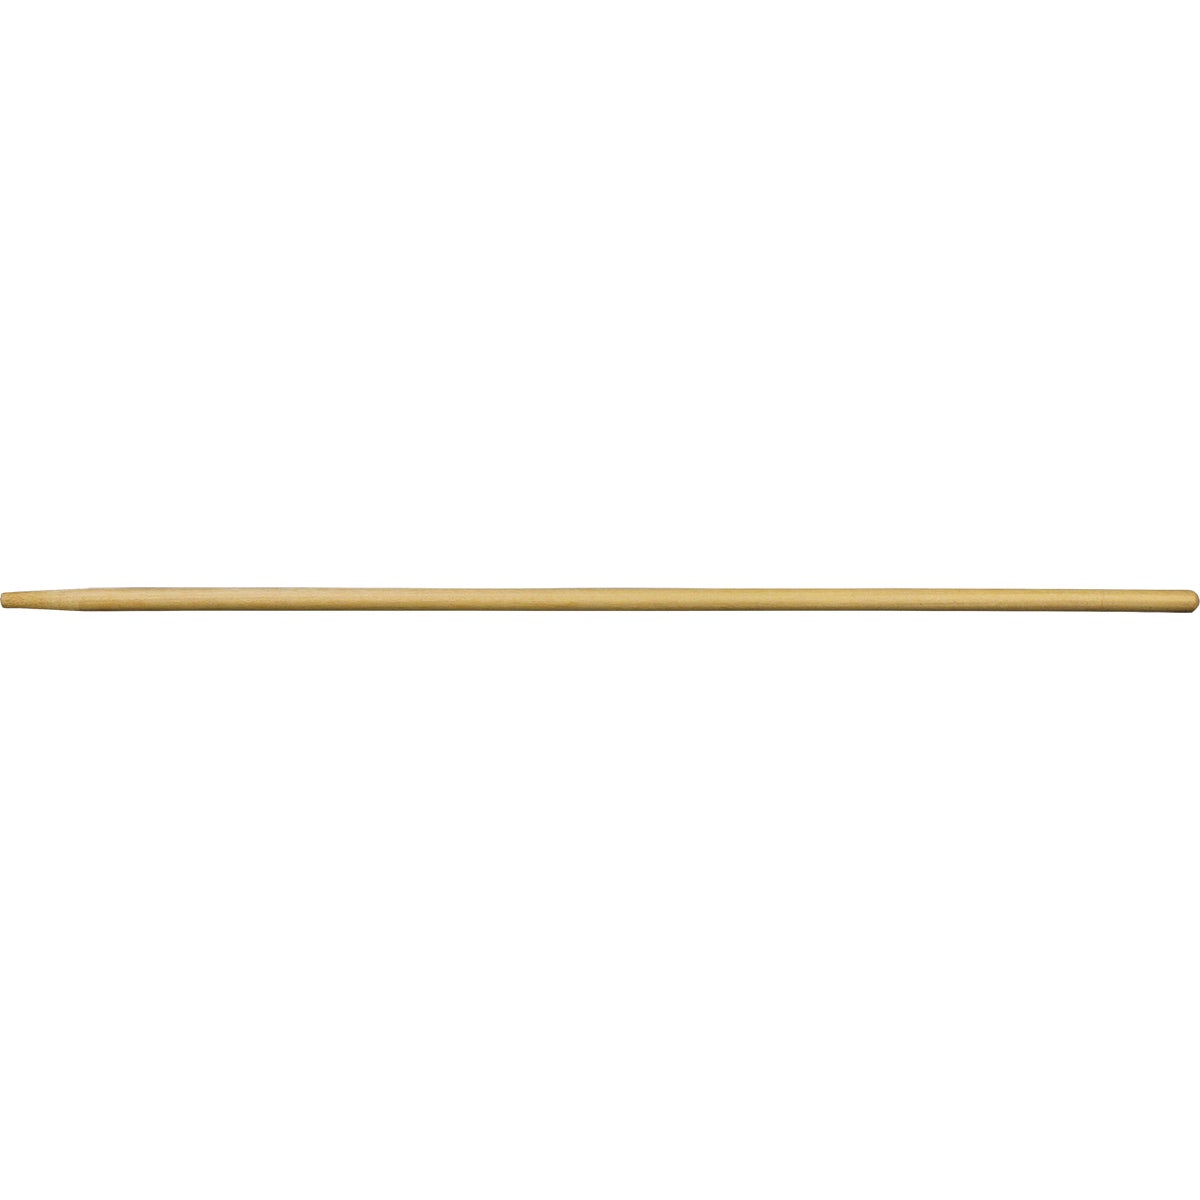 Item 780417, 4 Ft. single piece wood extension pole with threaded wood tip. 15/16 In.